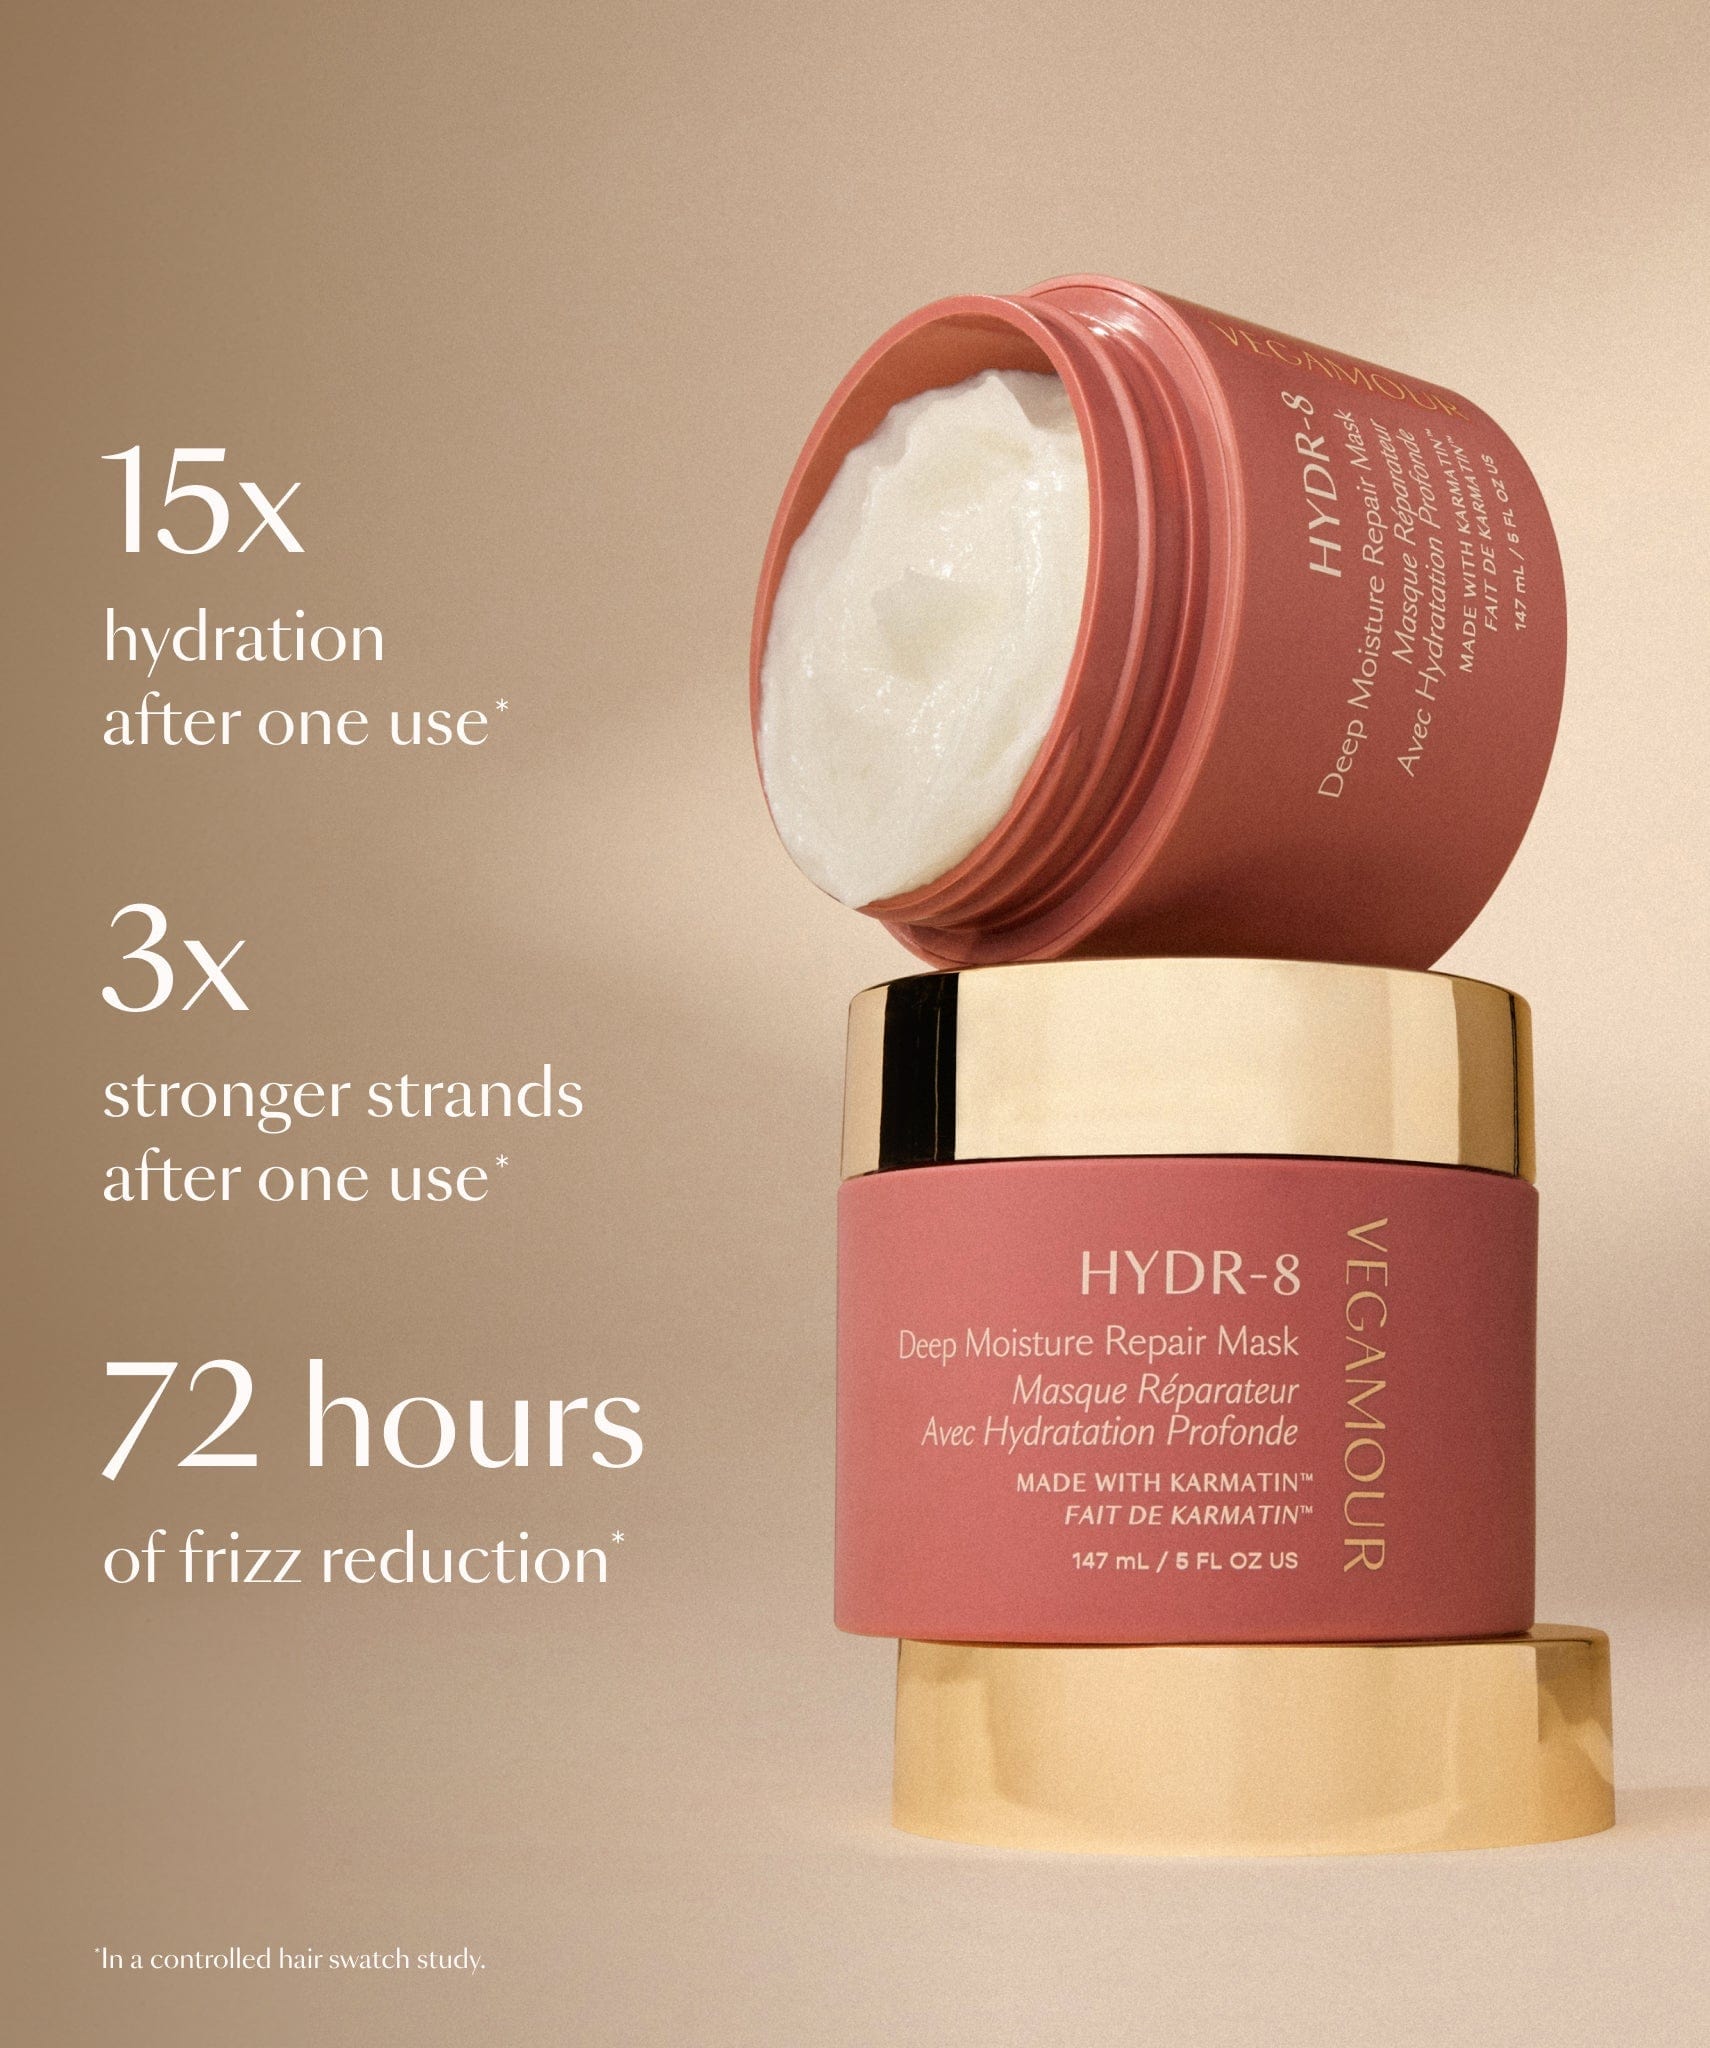 Complimentary: HYDR-8 Full Routine Kit